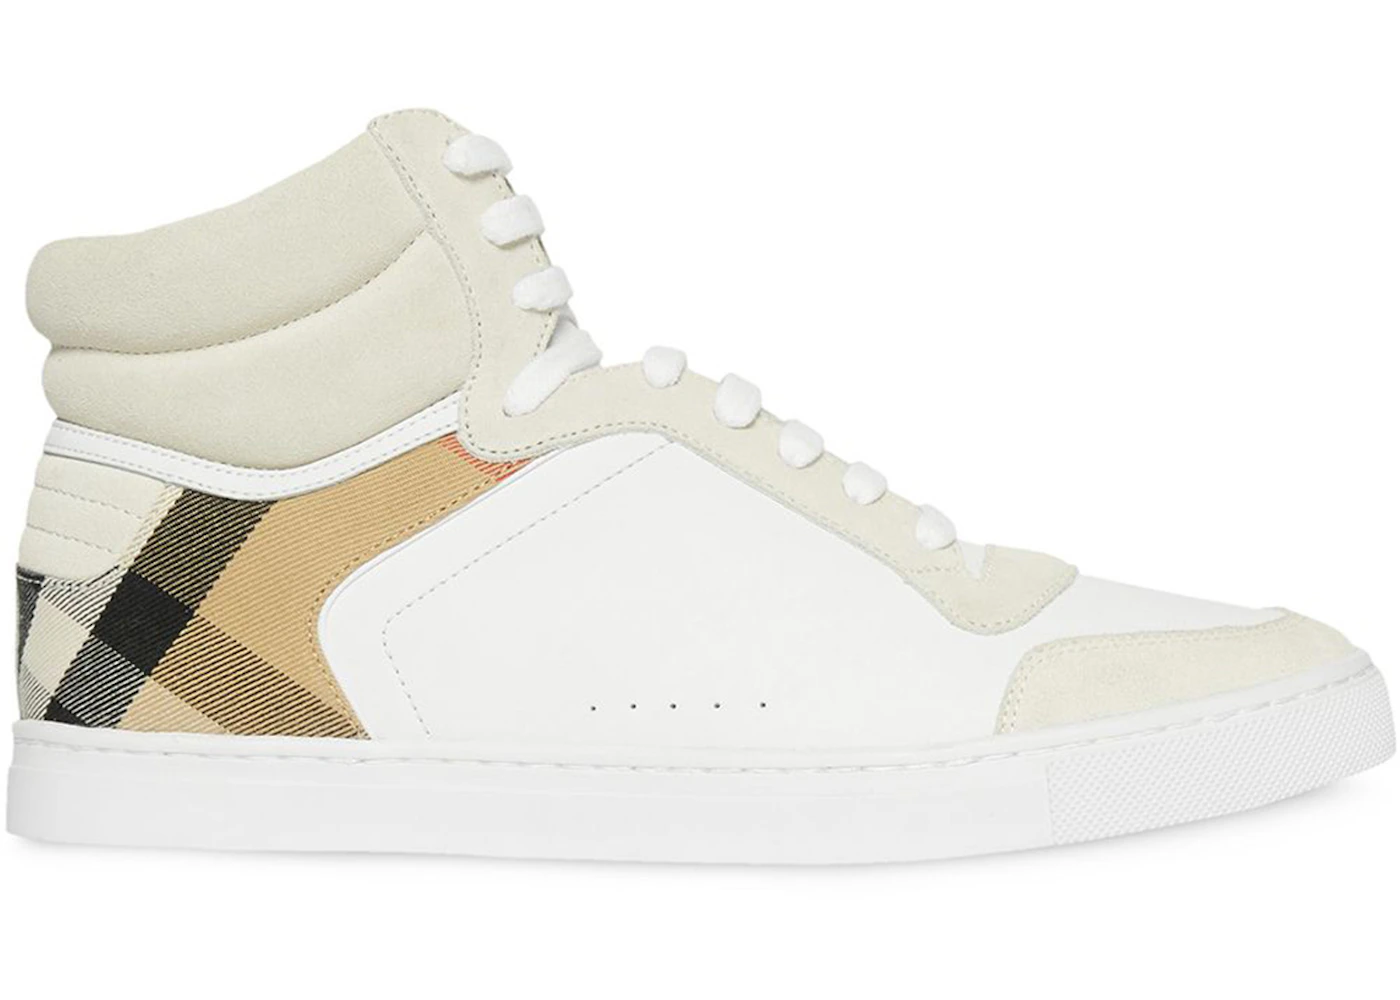 Burberry House Check High Top sneakers White Archive Beige Men's ...